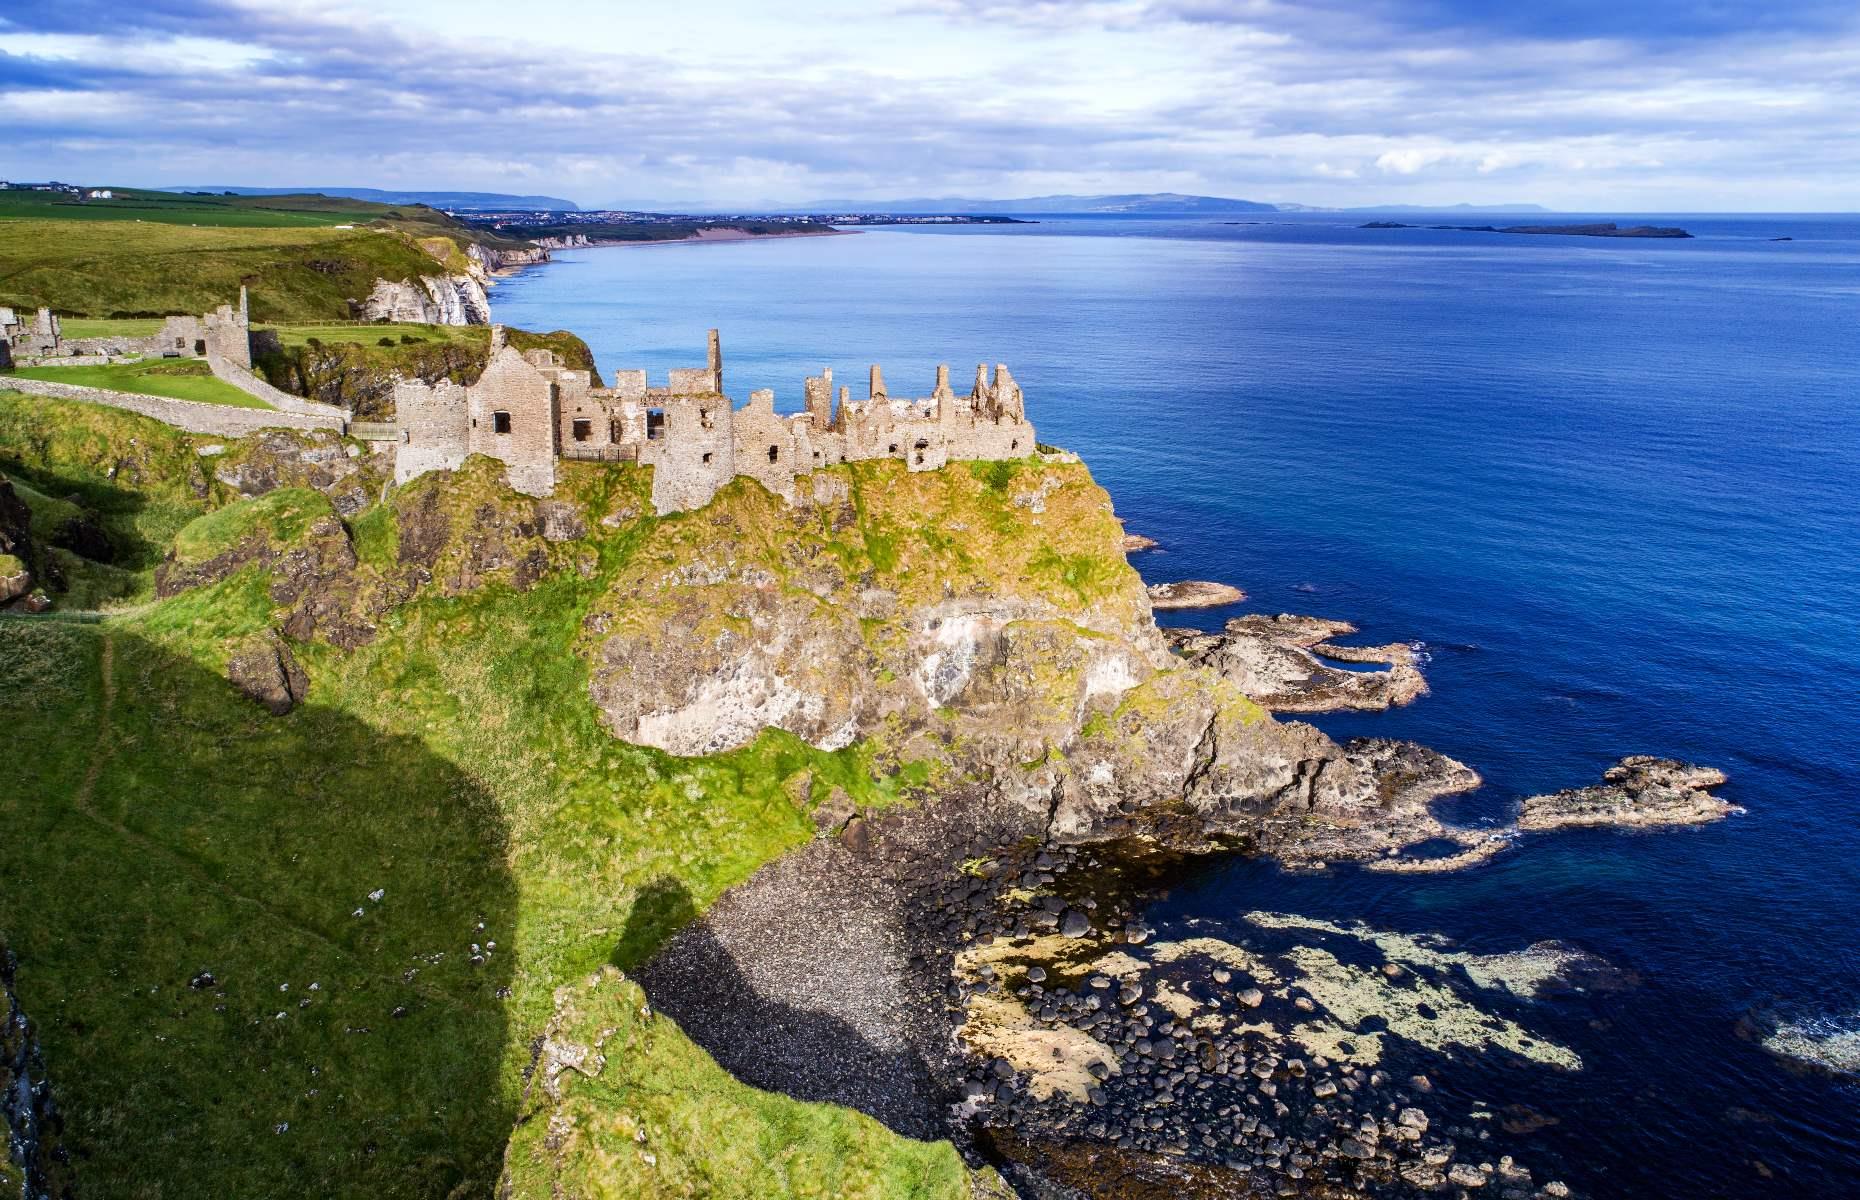 <p>Nestled on a cliff overlooking the Atlantic Ocean, <a href="https://discovernorthernireland.com/things-to-do/dunluce-castle-medieval-irish-castle-on-the-antrim-coast-p675011">Dunluce Castle</a> is one of Northern Ireland’s most breathtaking sights. Originally built around the 13th century by Richard de Burgh, the 2nd Earl of Ulster, the castle was owned by the feuding McQuillan and McDonell clans during the 16th century. By the late 1700s, the castle had been abandoned and left to decay. Set against the stunning backdrop of the County Antrim coast, its picturesque ruins now house historical and archaeological exhibits.</p>